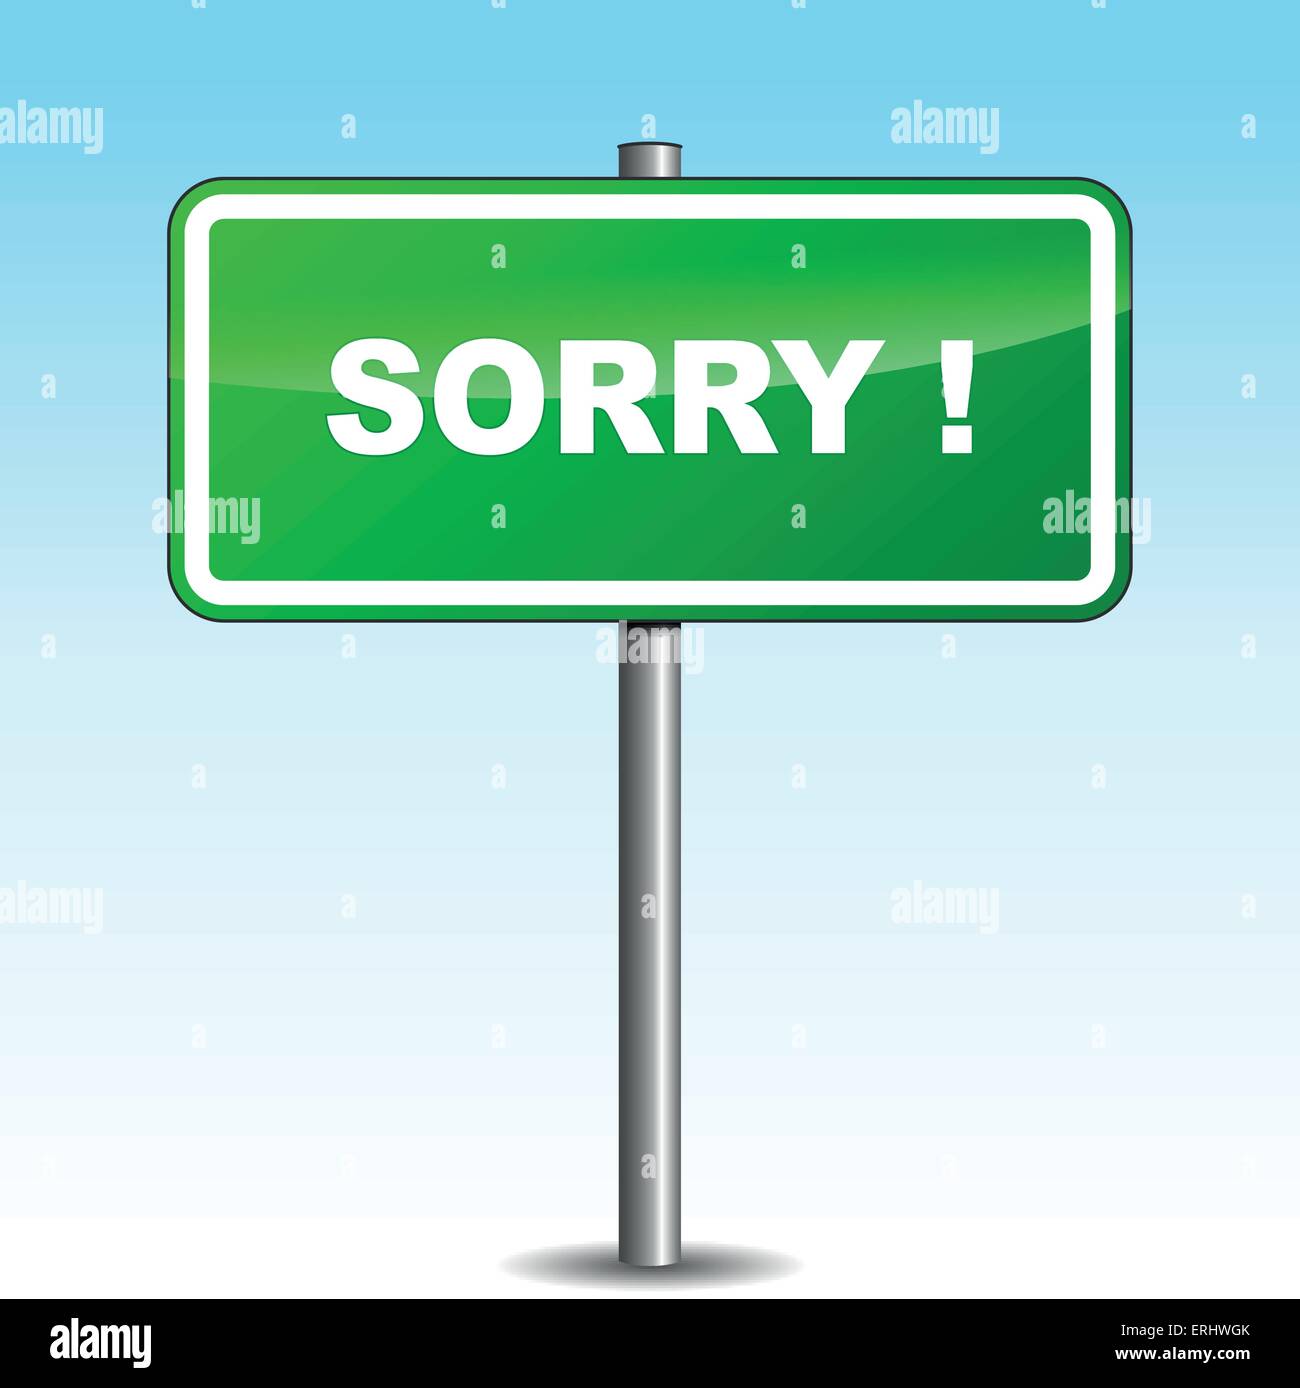 Vector illustration of sorry signpost on sky background Stock Vector